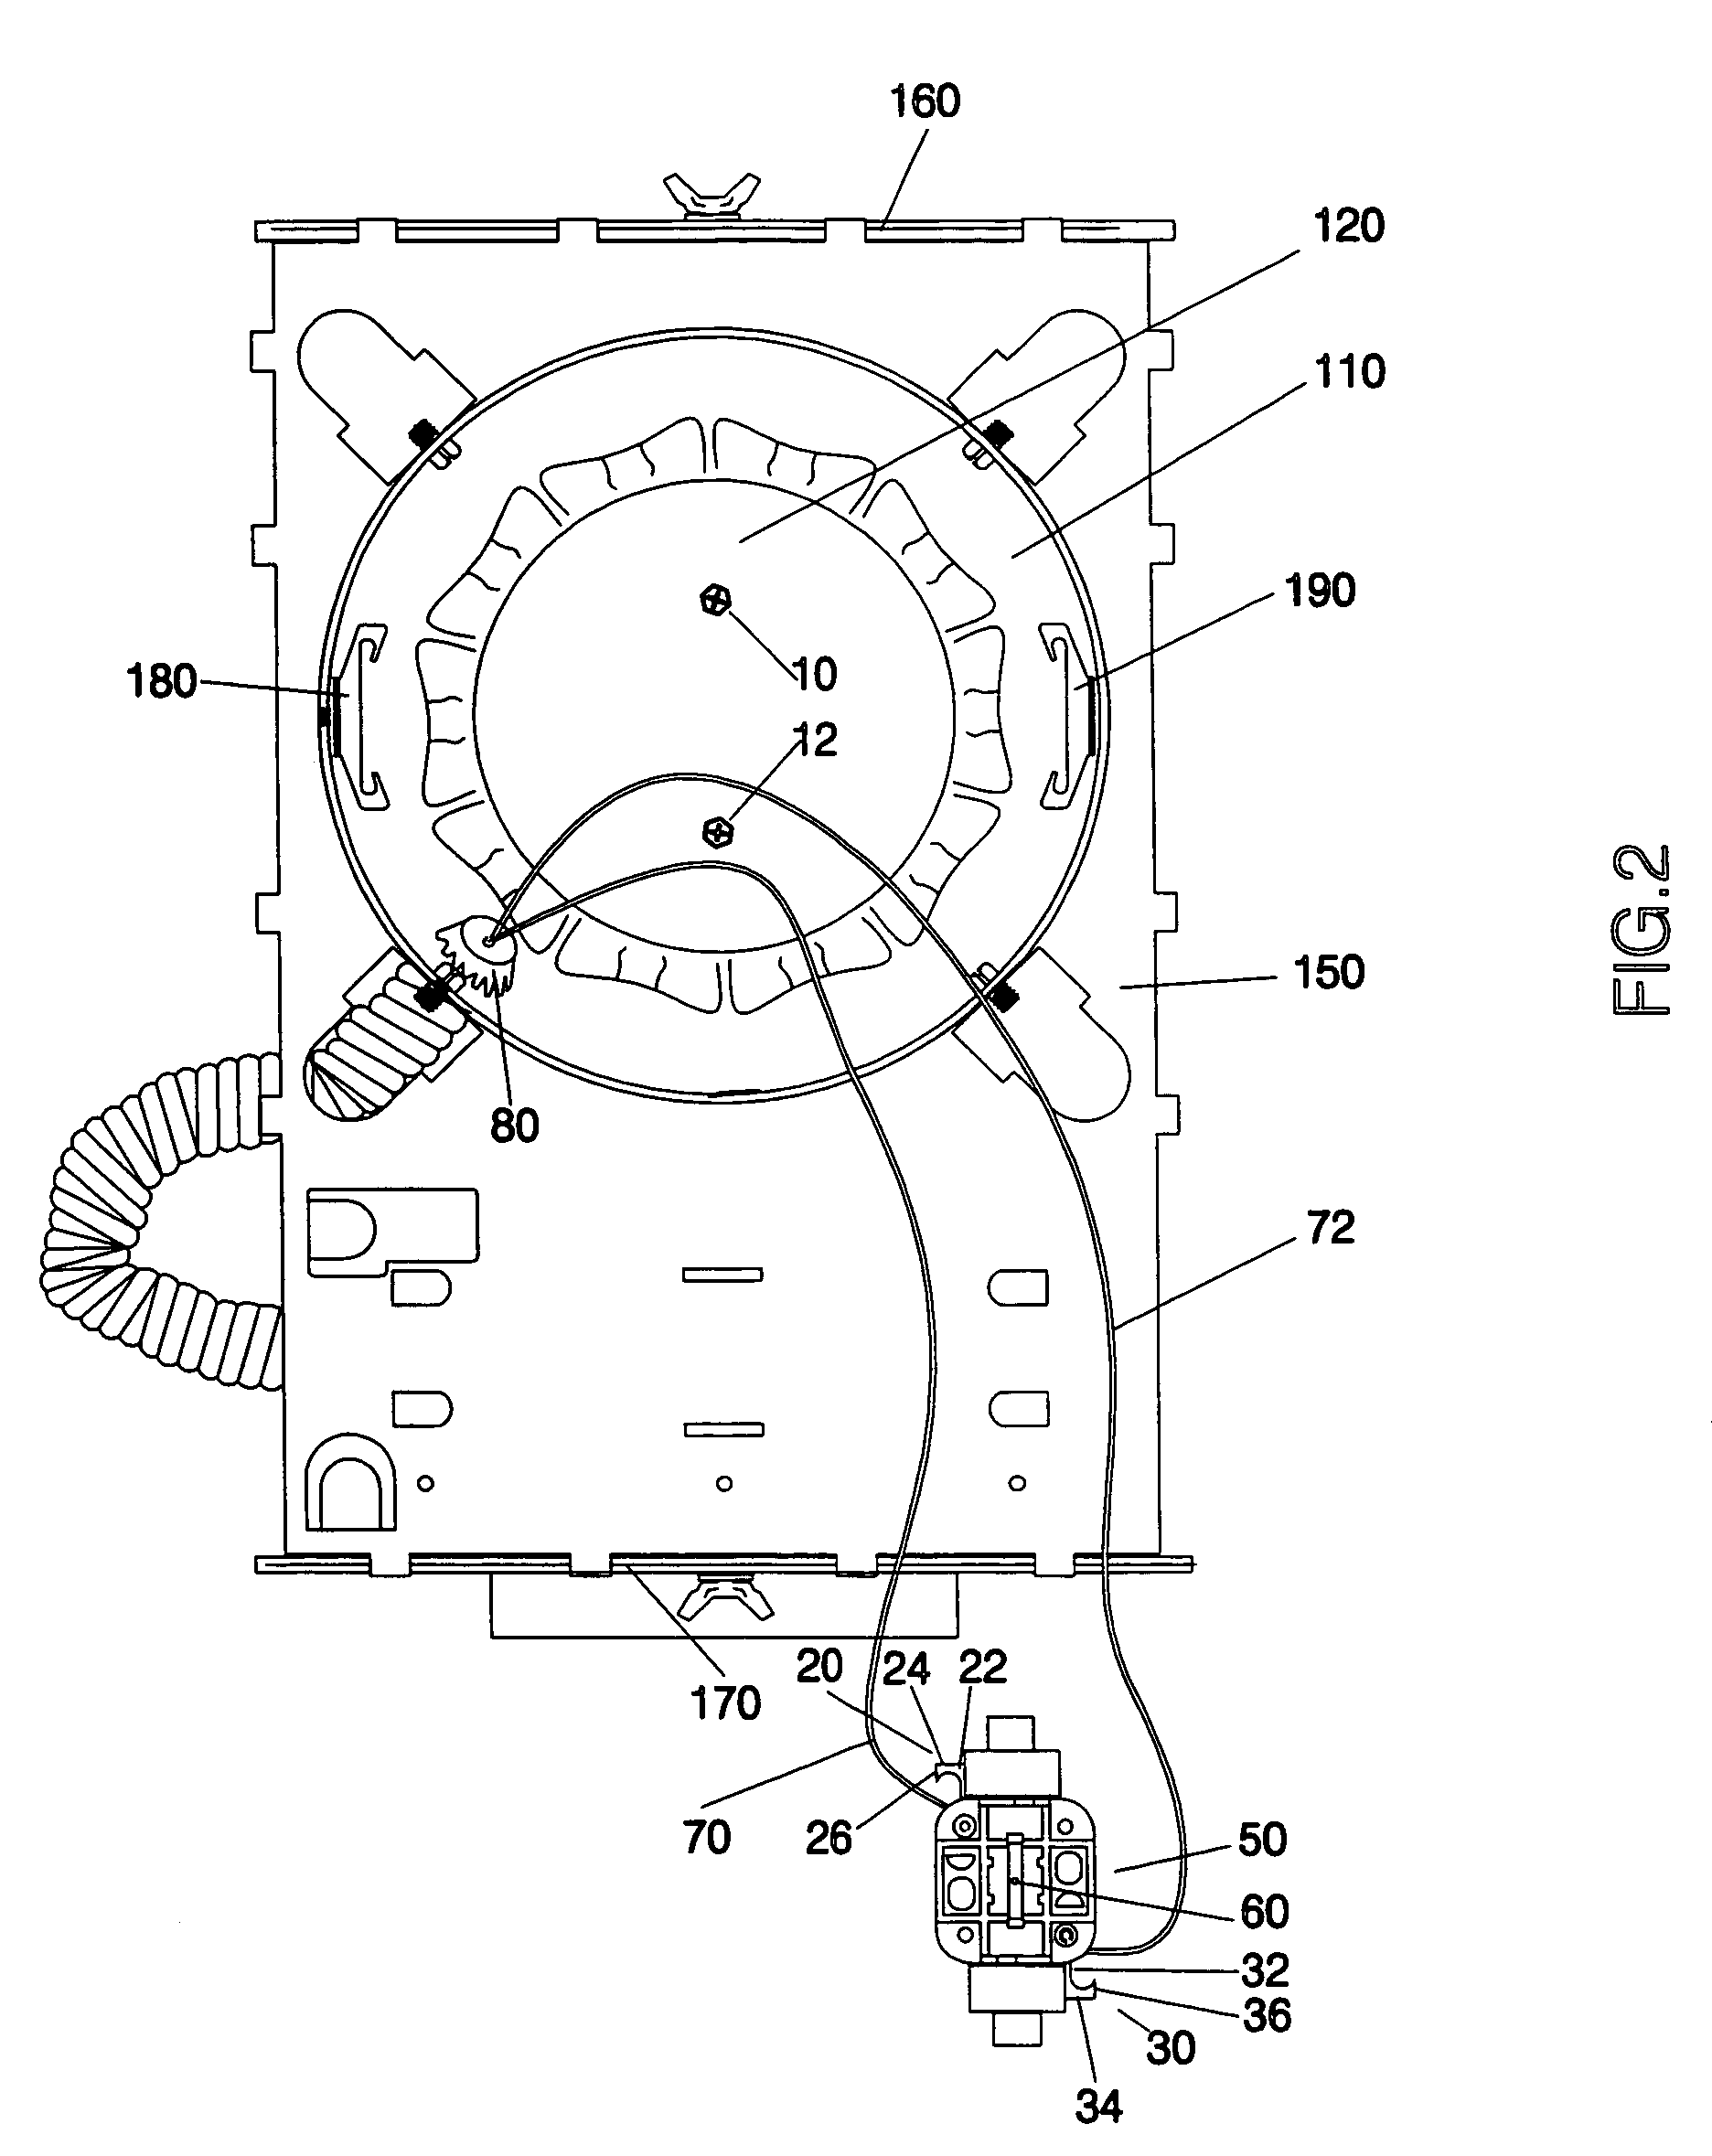 Apparatus to rapidly insert a socket assembly into a ceiling fixture